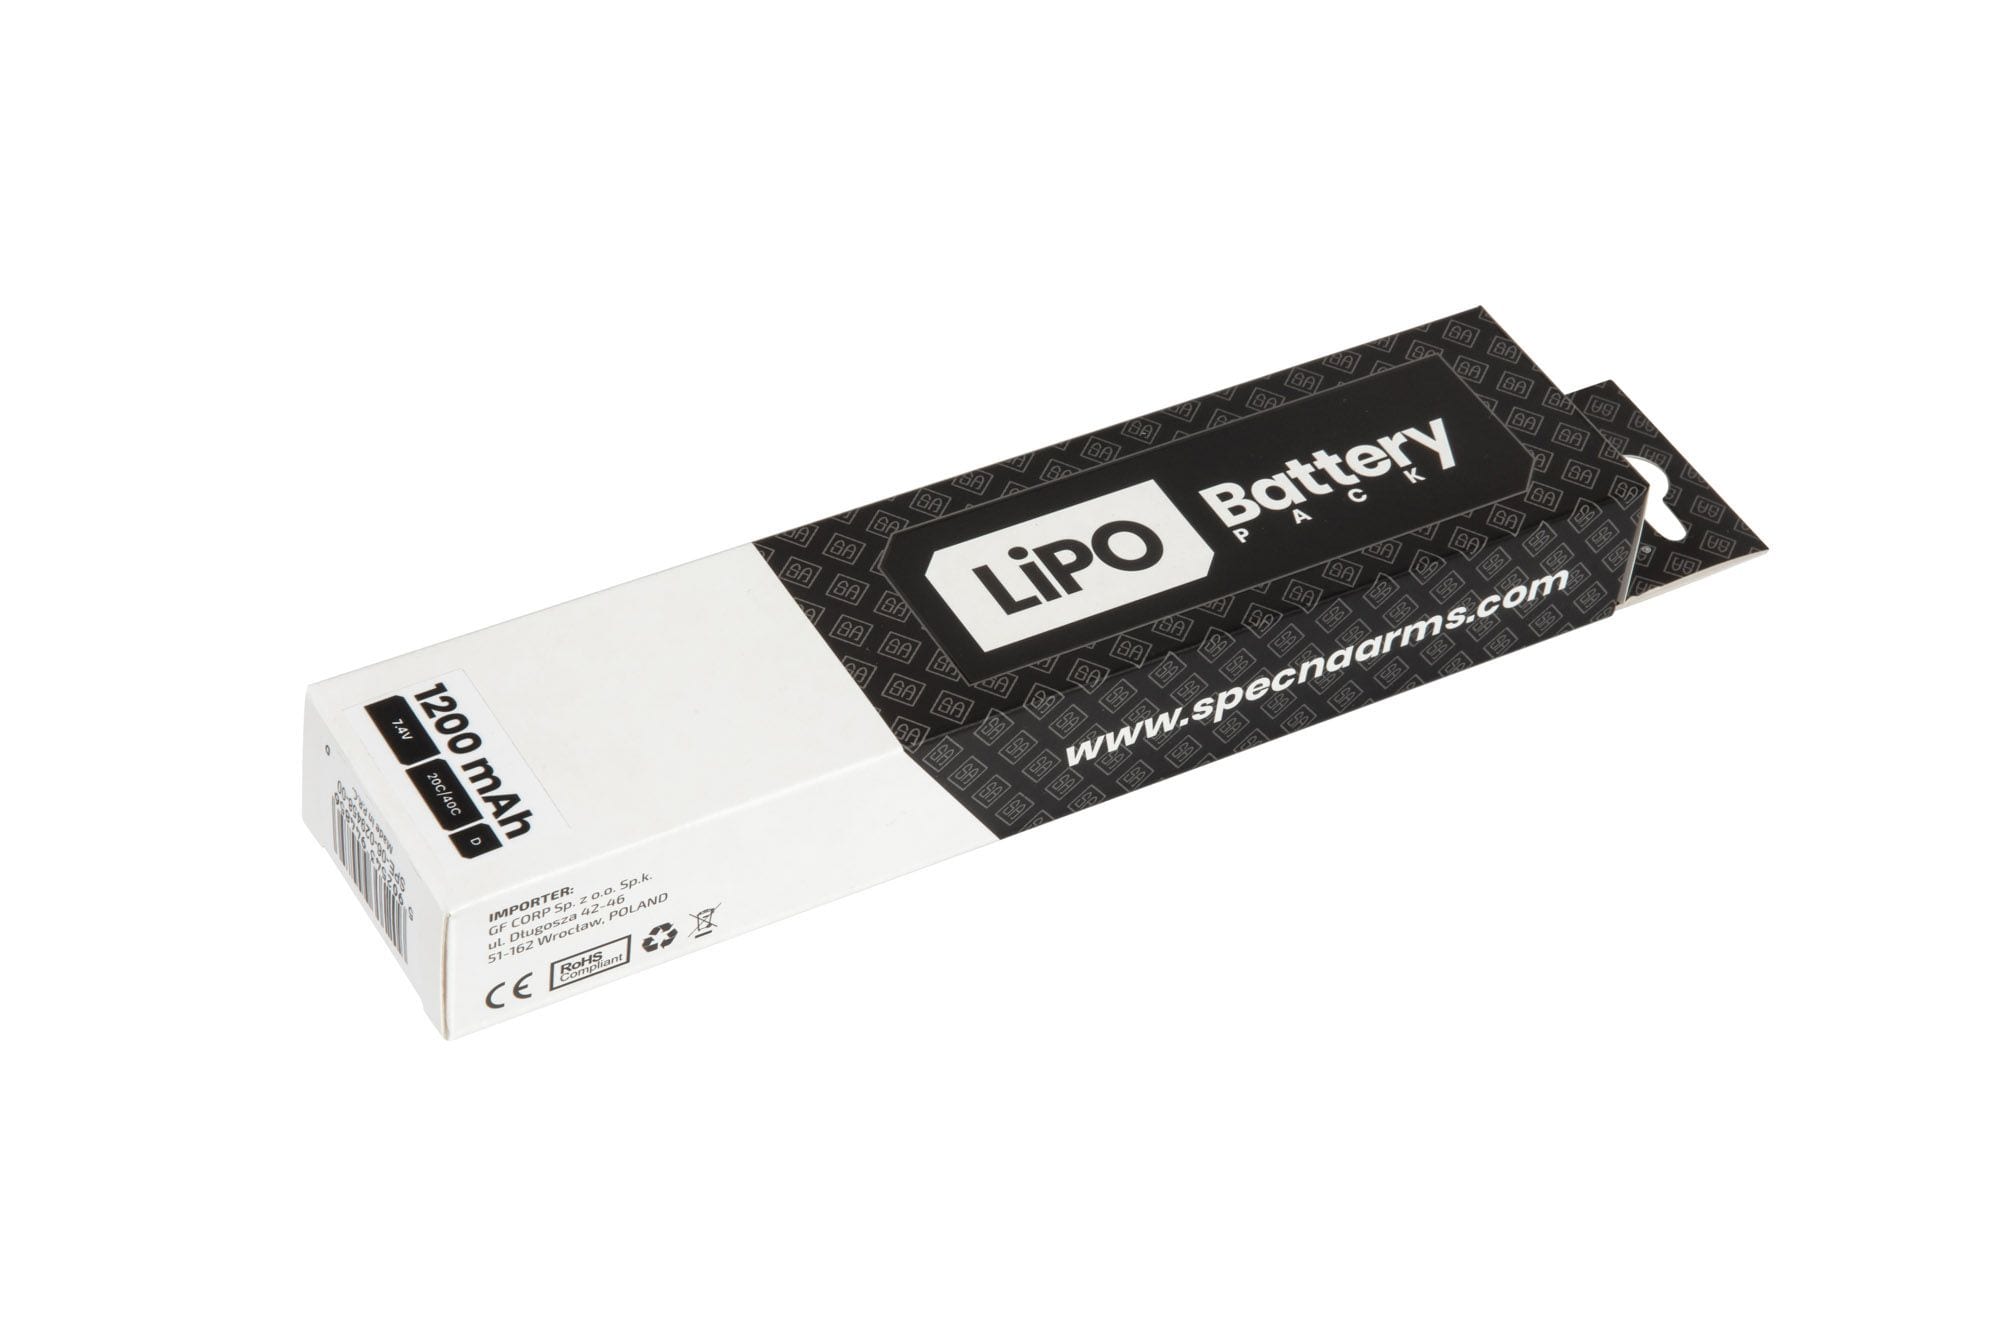 LiPo 7.4V 1200mAh 20C / 40C Battery - T-Connect (Deans) by Specna Arms on Airsoft Mania Europe